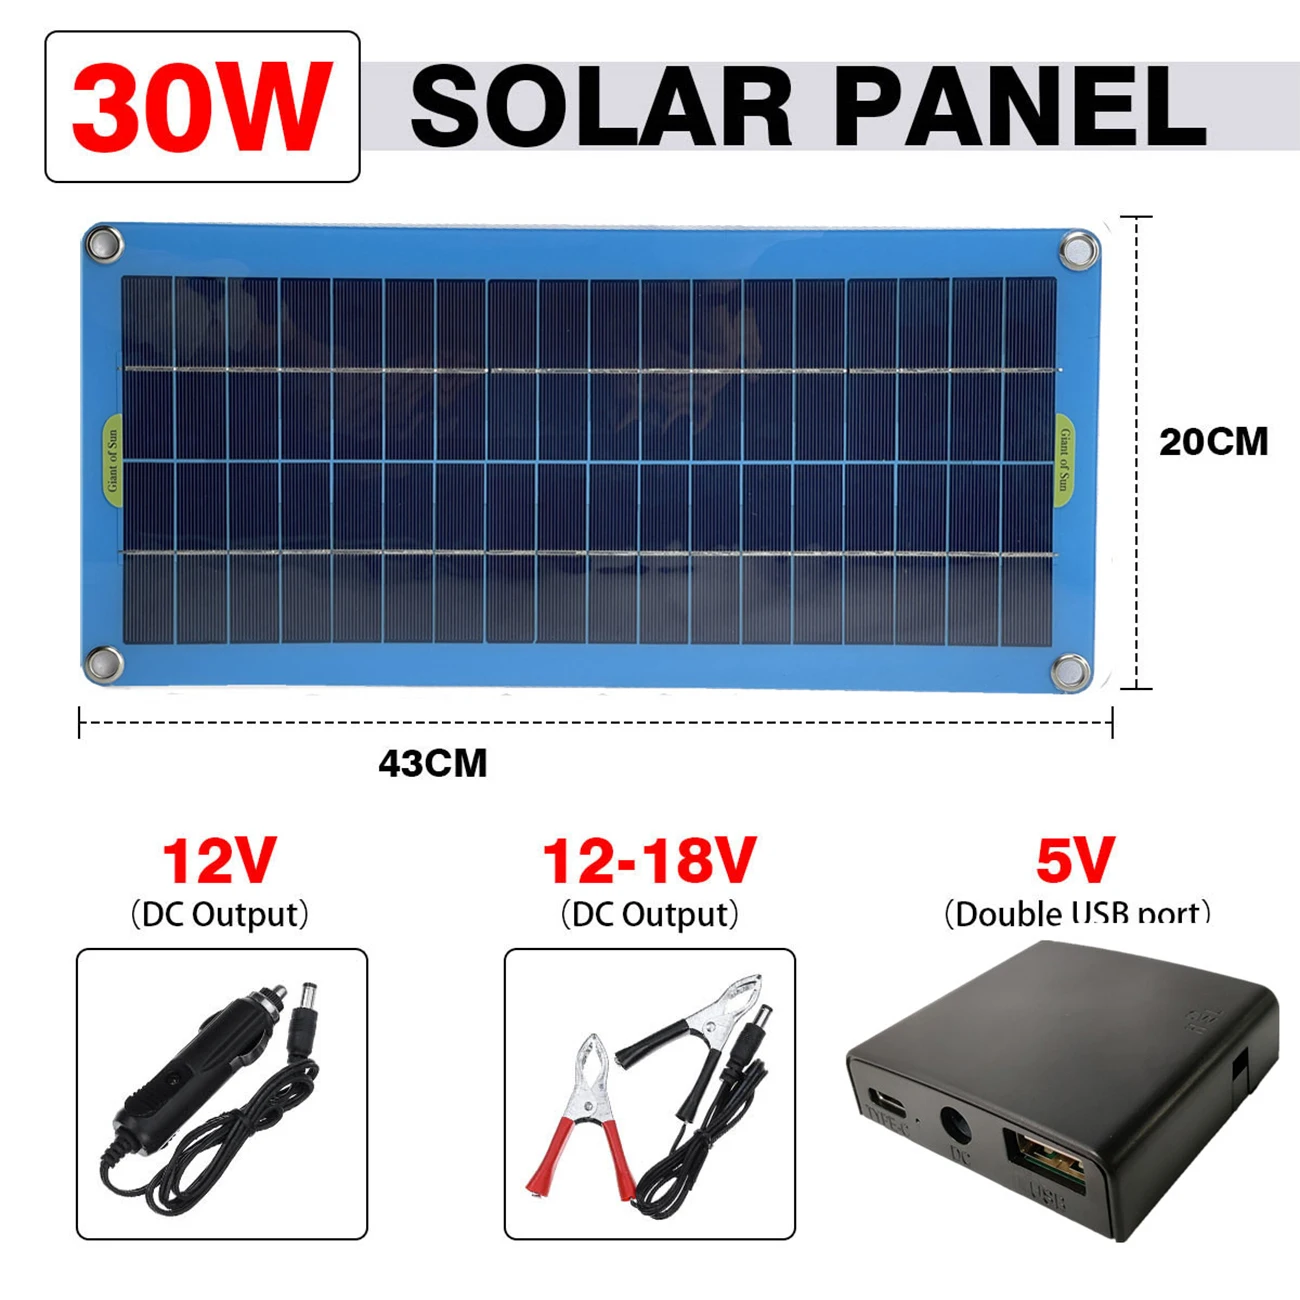 

30W Solar Panel 12V Polycrystalline USB Power Portable Outdoor Cycle Camping Hiking Travel Solar Cell Phone Charger